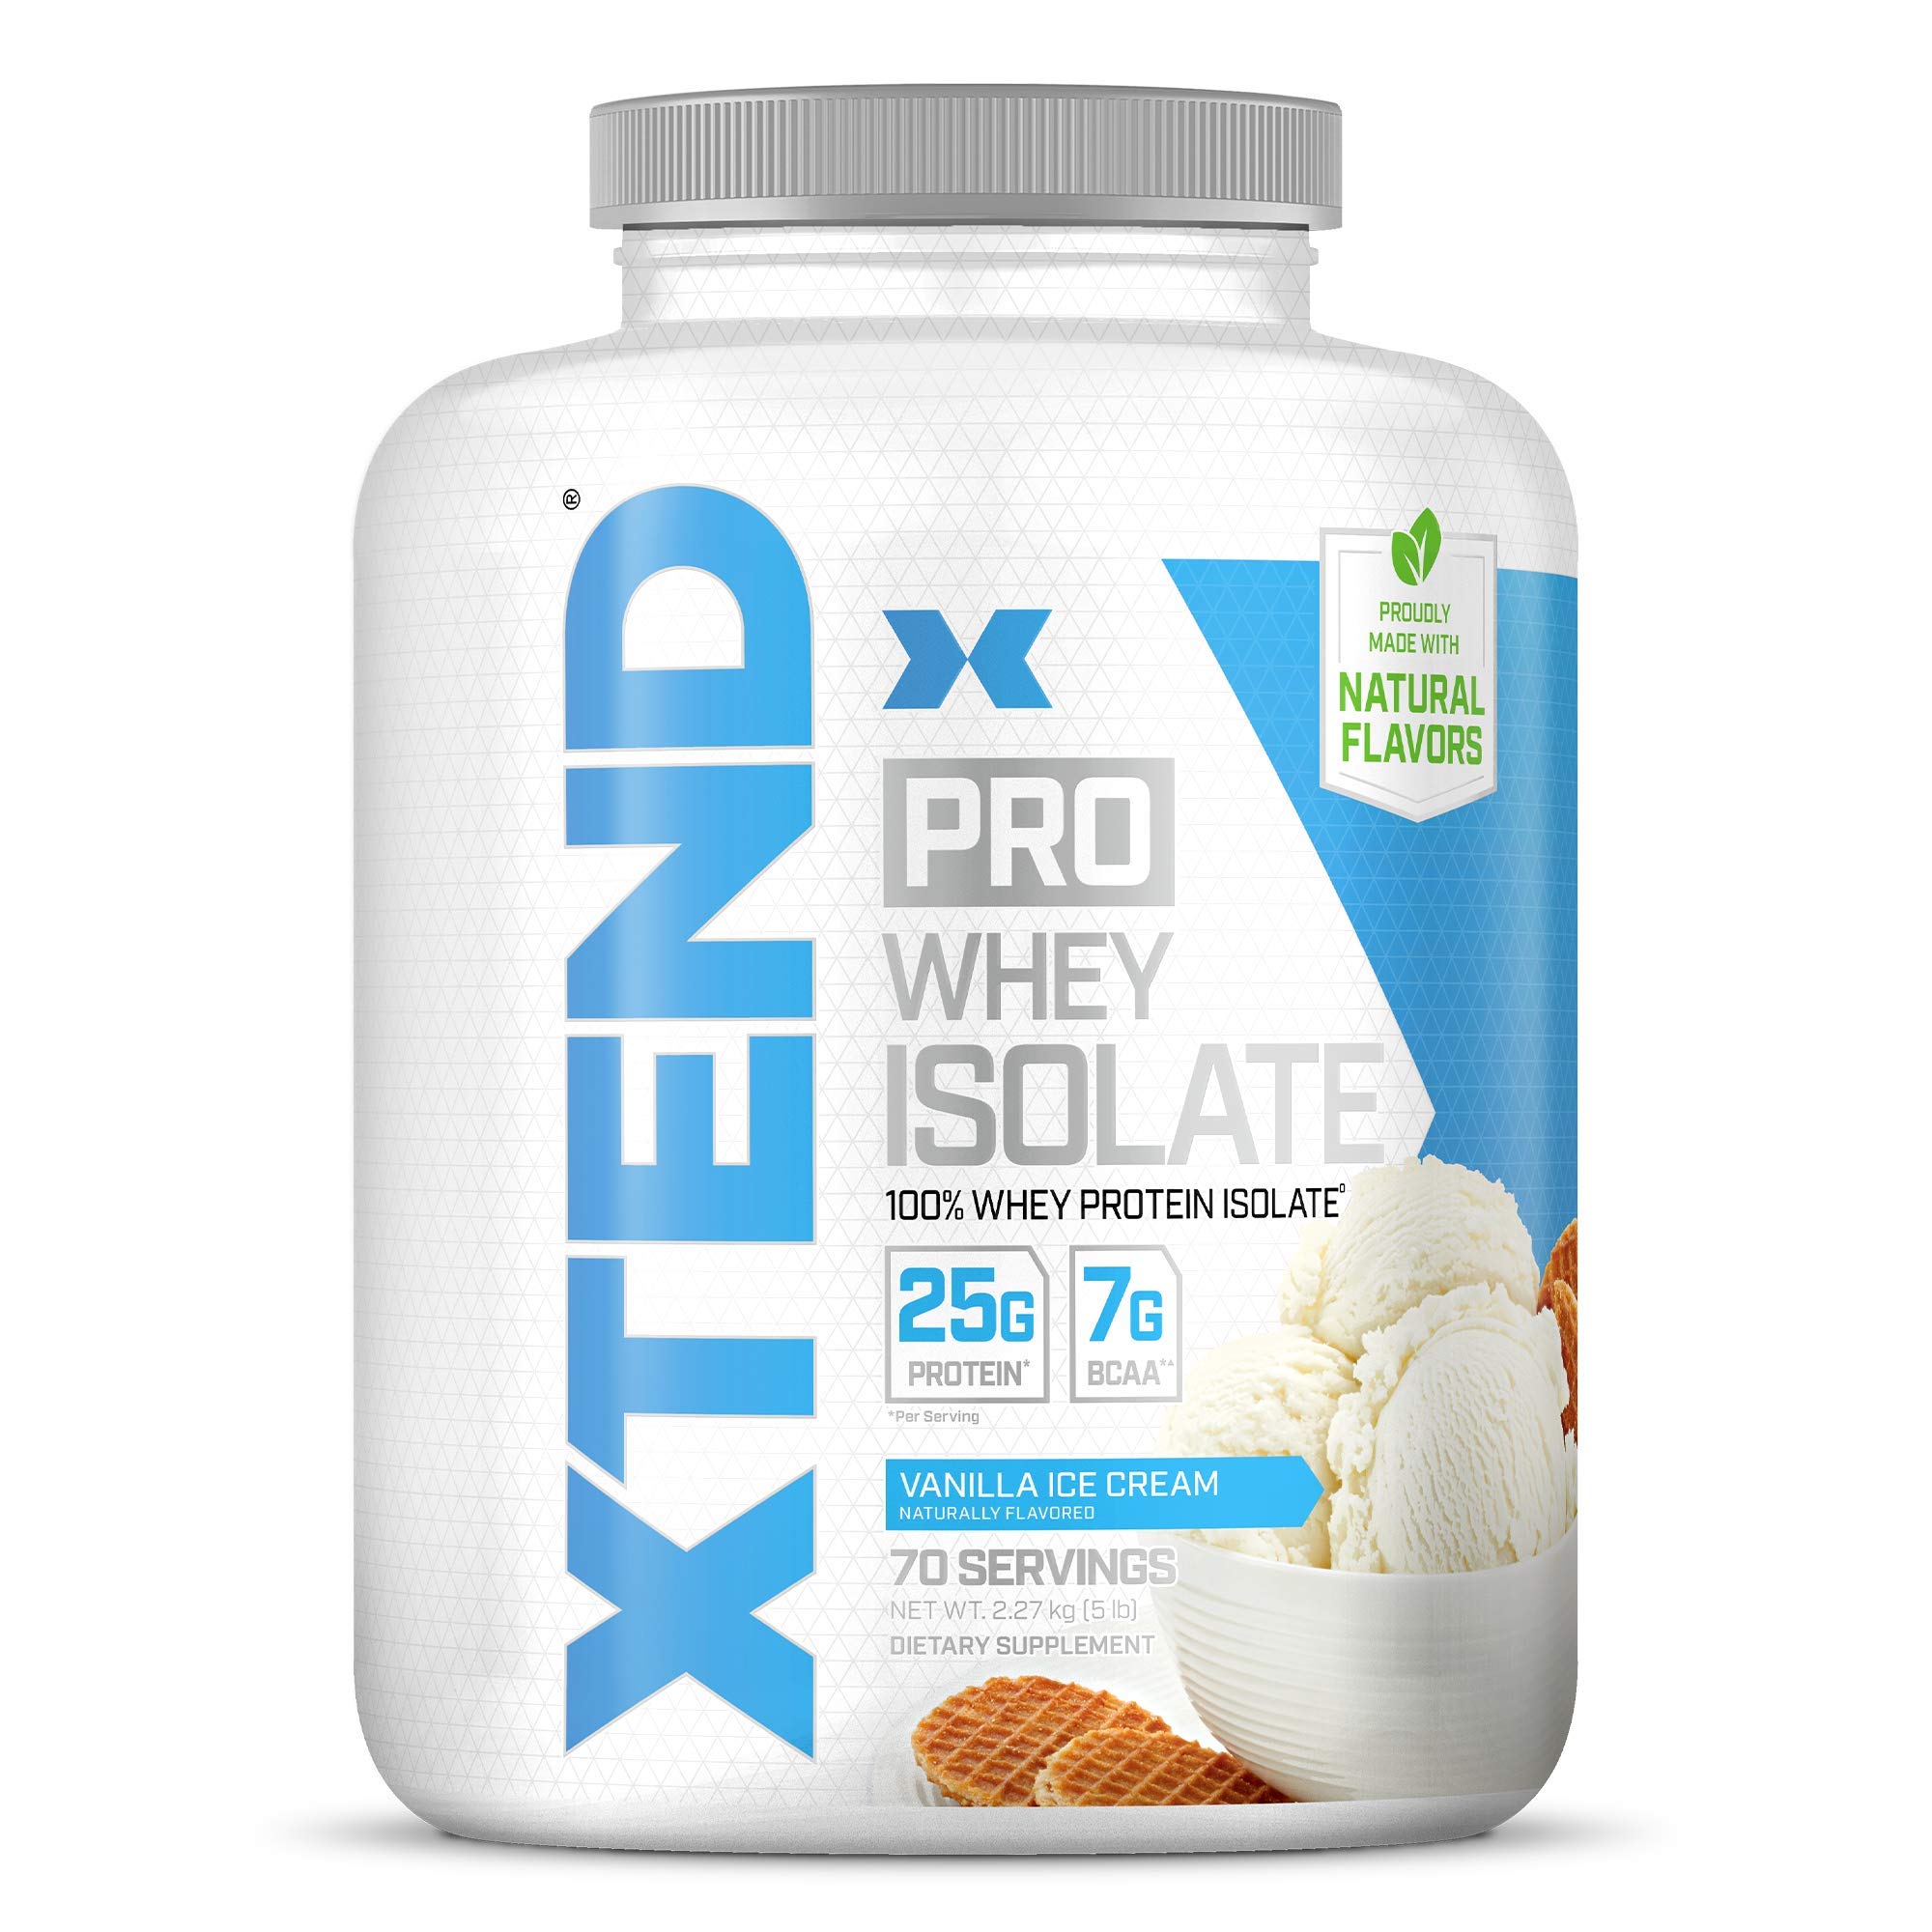 XTEND Pro Protein Powder Vanilla Ice Cream | 100% Whey Protein Isolate | 5 lbs (70 servings) | $35.00 after 25% S&S coupon at Amazon